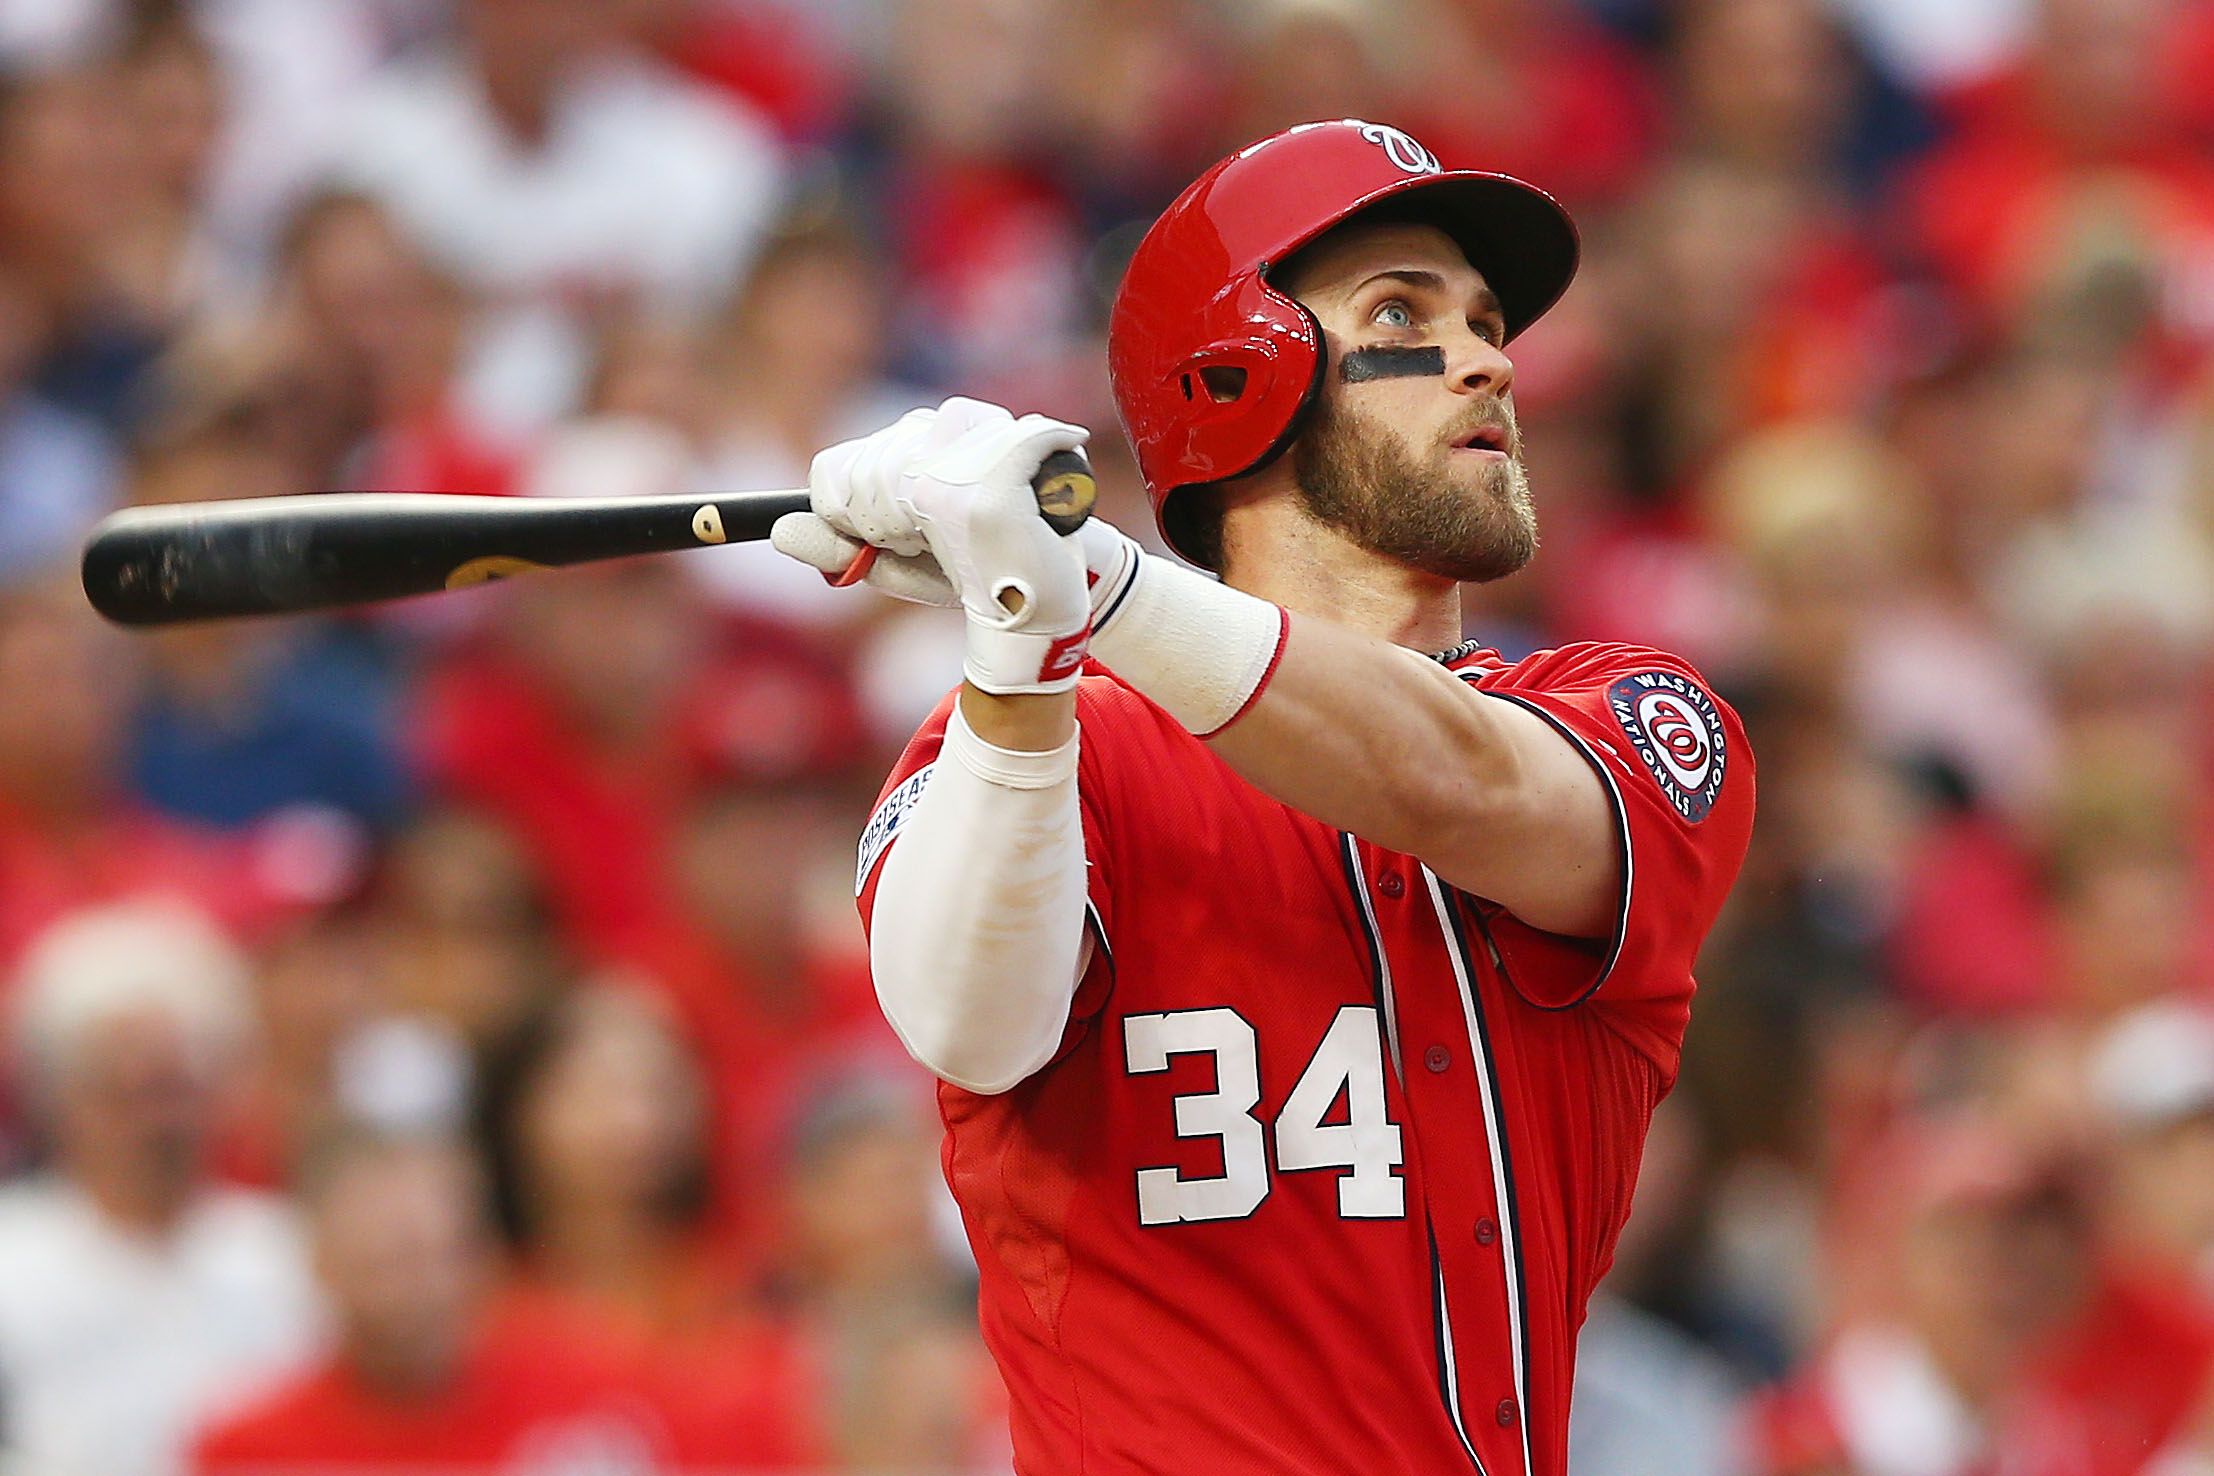 Washington Nationals Gift Guide: 10 must-have Bryce Harper items